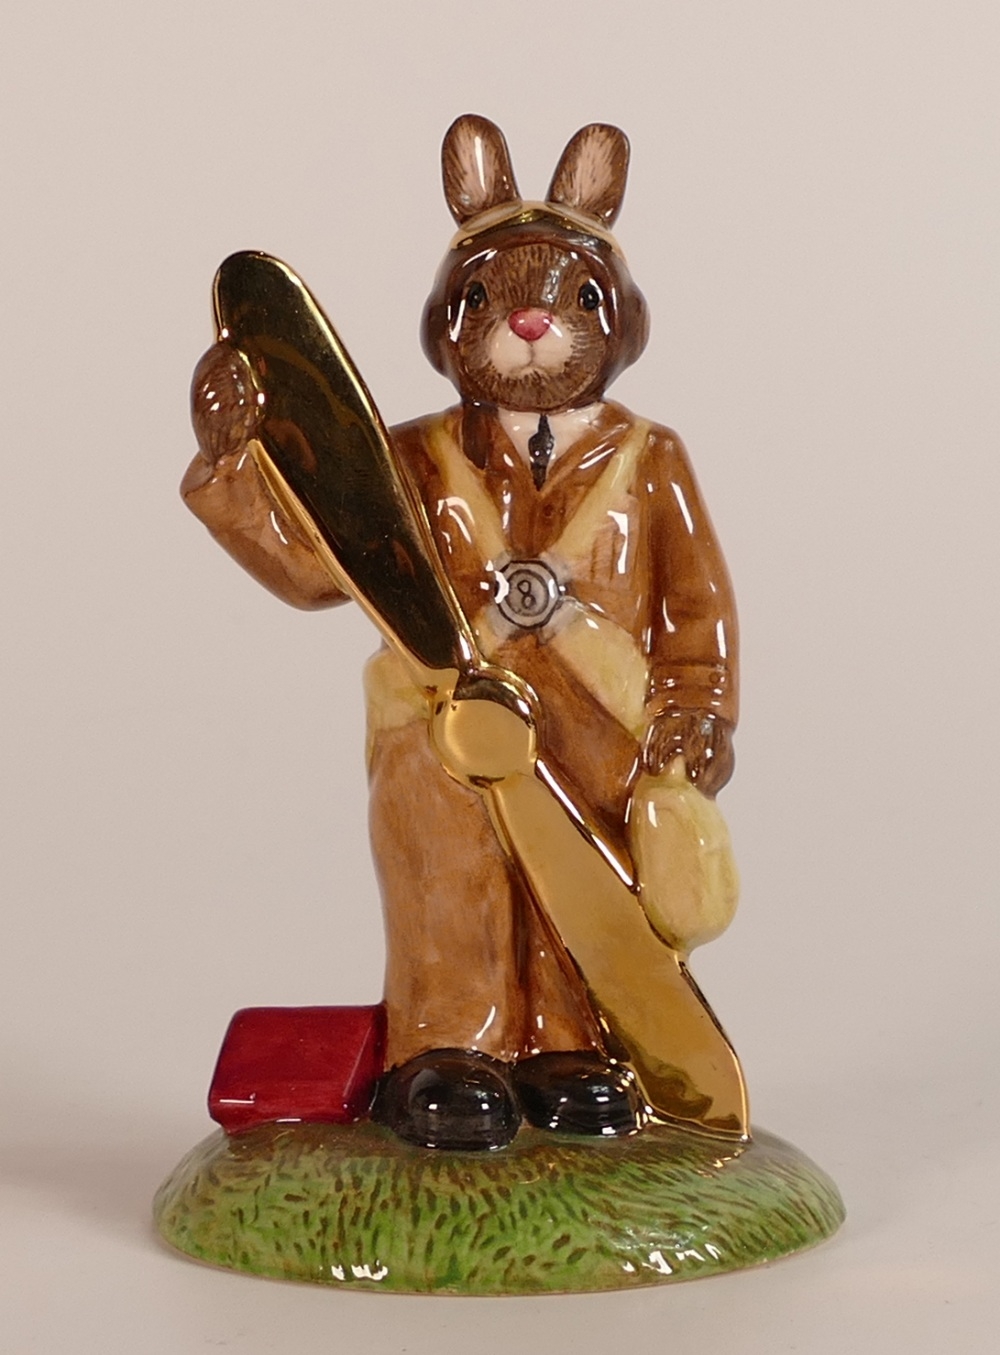 Royal Doulton Bunnykins figure of The Pilot DB369 in a gold colourway, edition of 100, box and